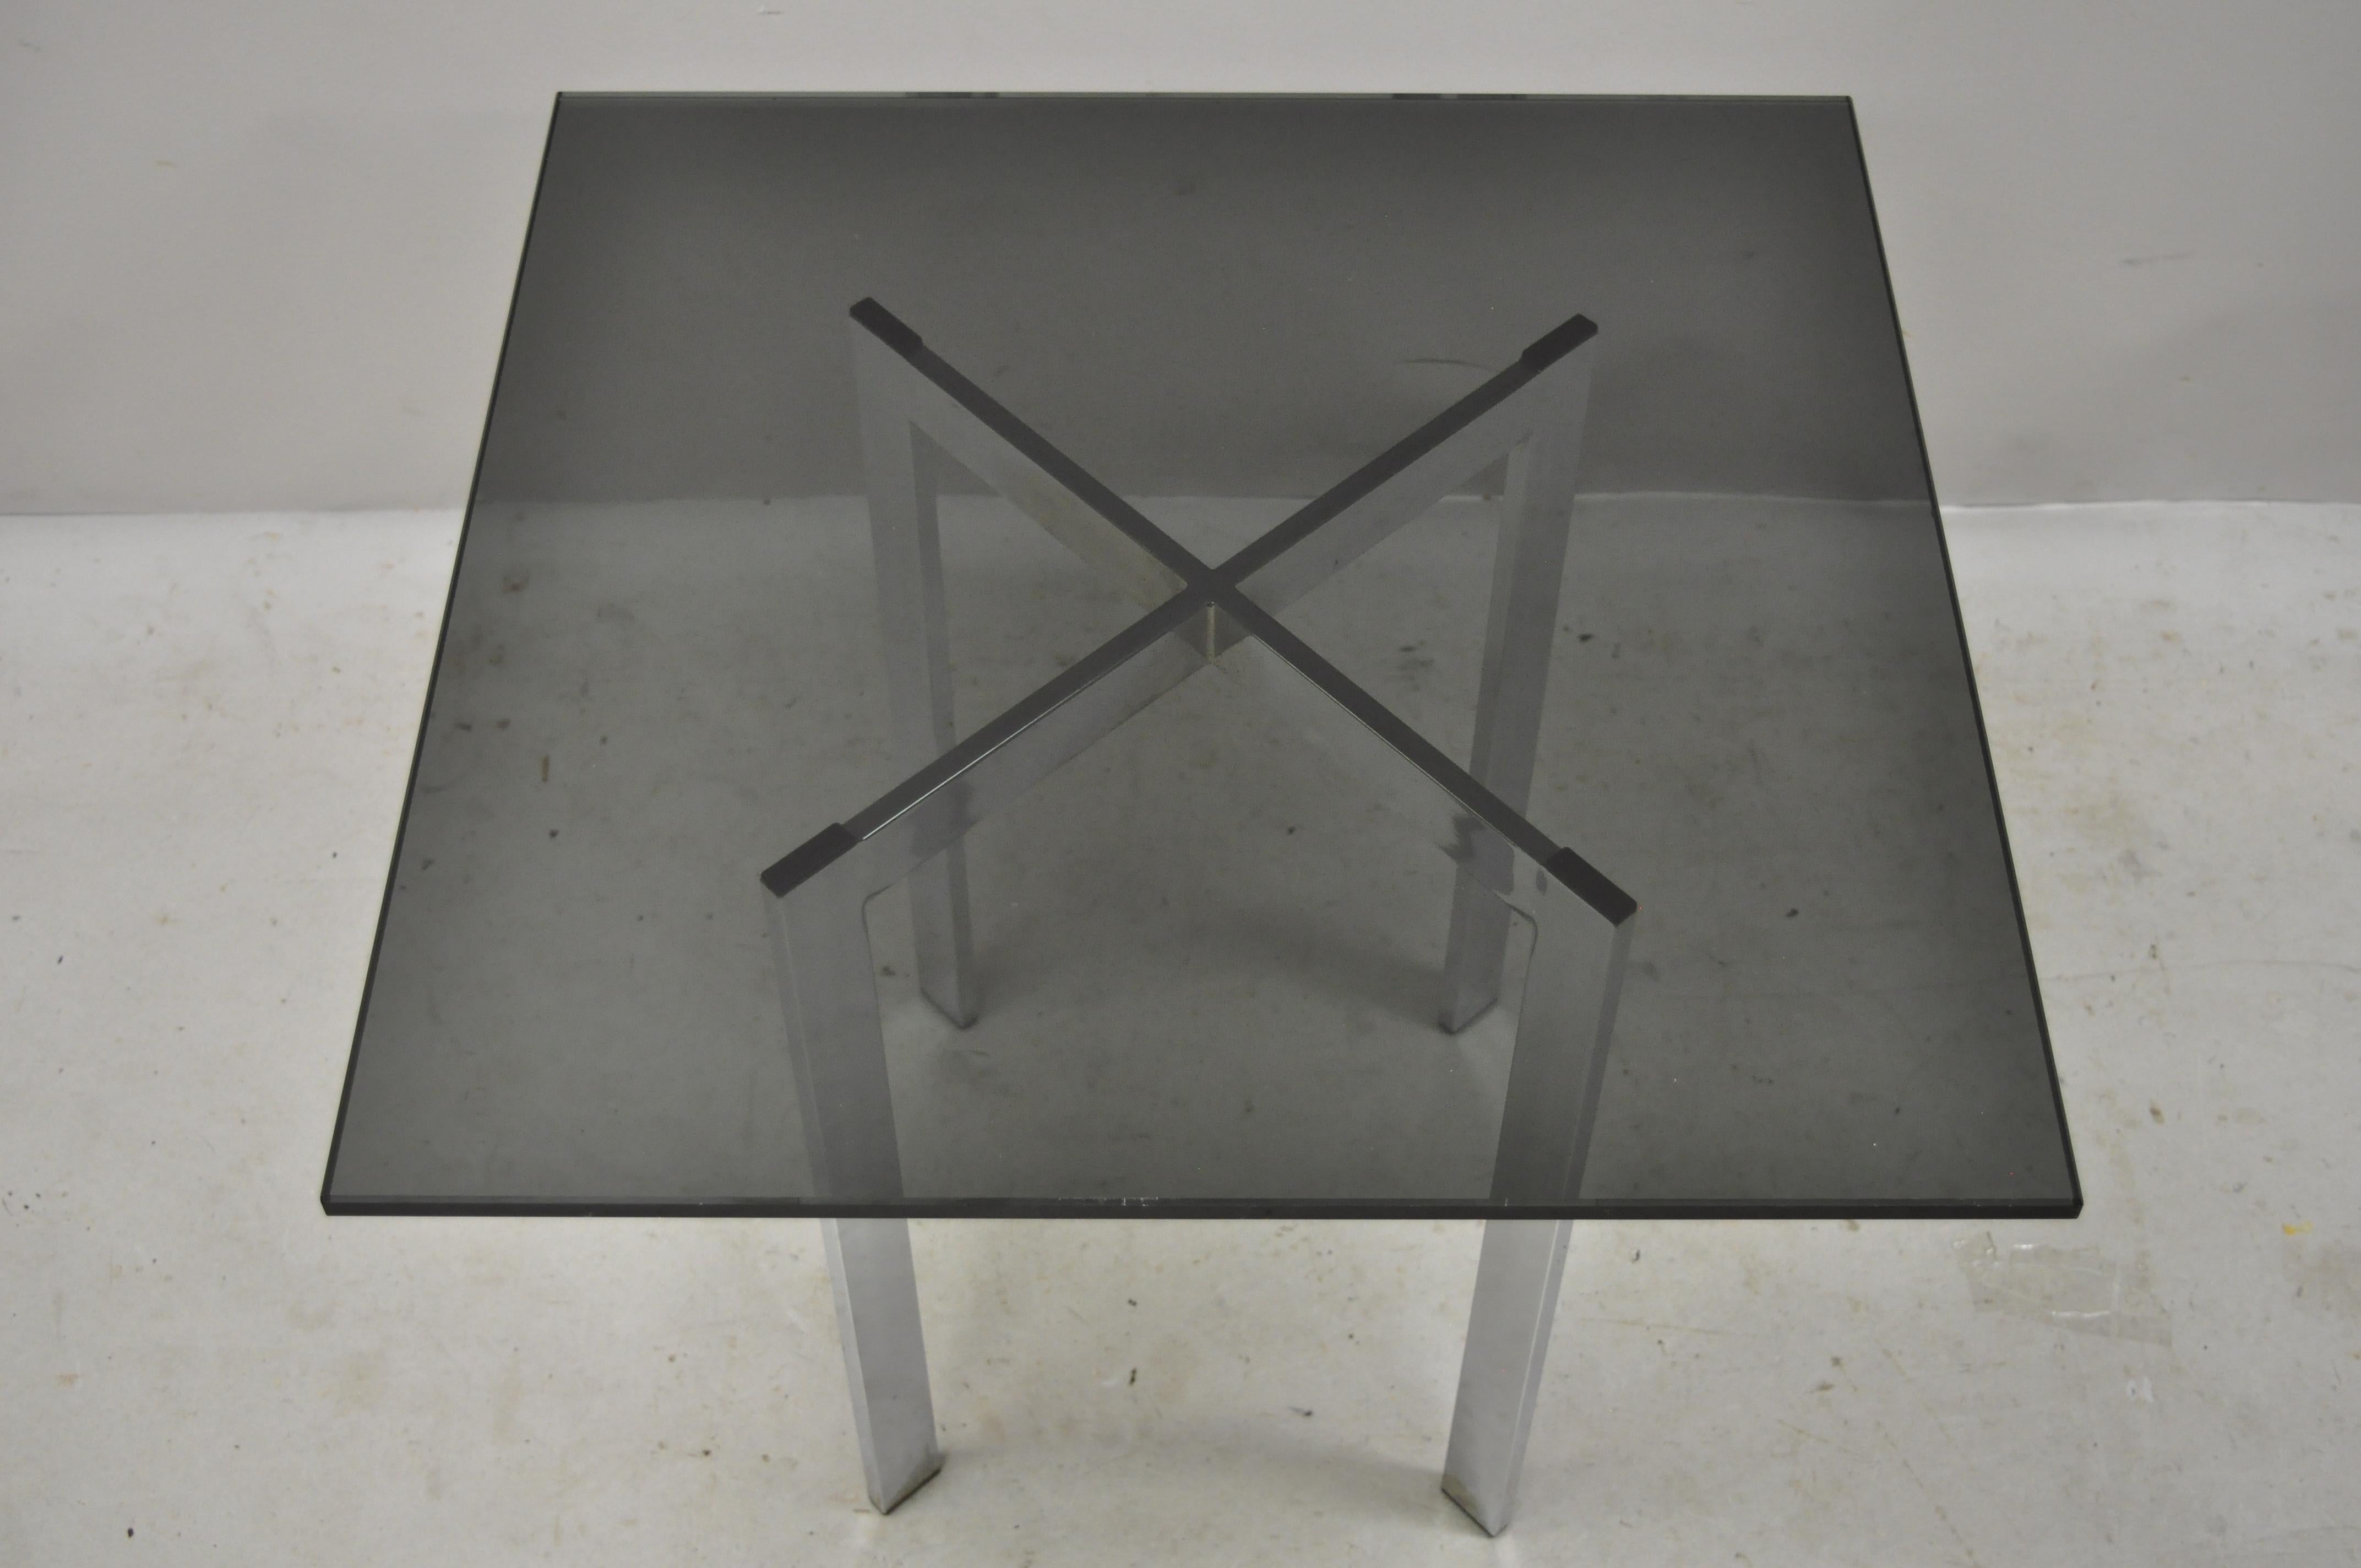 Mid-20th century chrome X-frame smoked glass Barcelona style side end table. Item features a smoked glass top, chrome X-frame, clean modernist lines, great style and form. Can be used with base up or down, circa mid-late 20th century. Measurements: